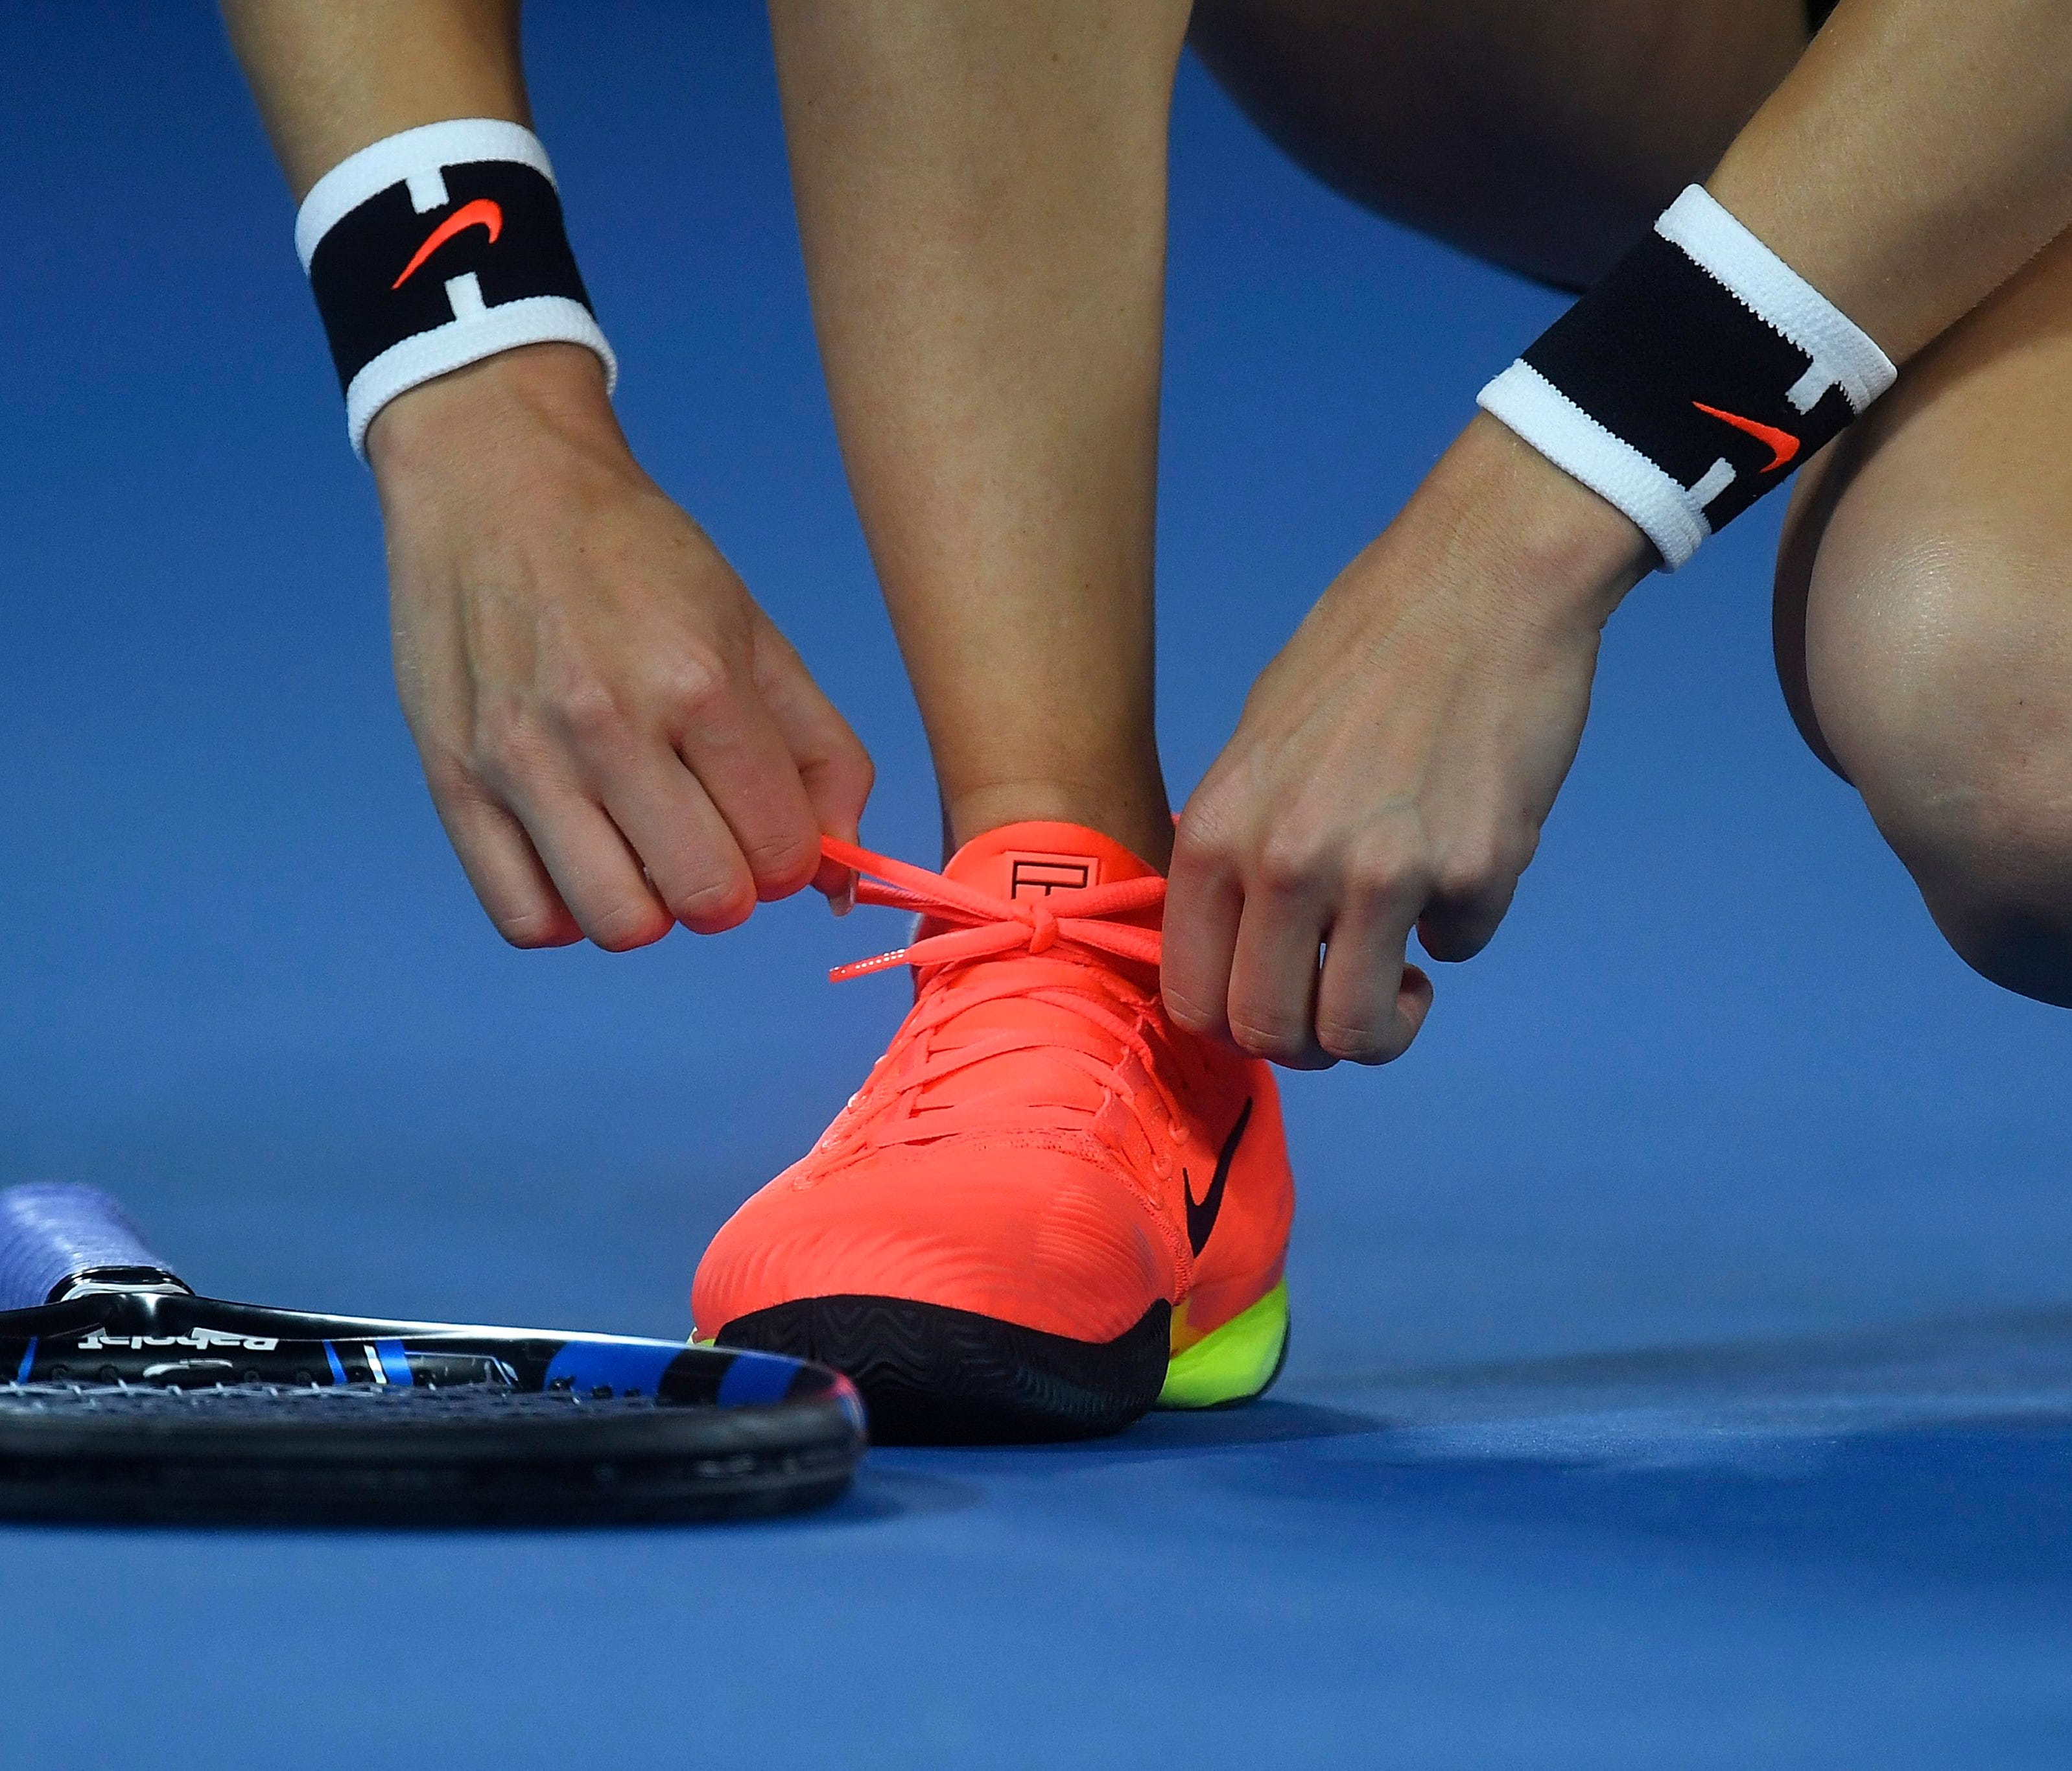 Eugenie Bouchard of Canada ties her shoes during her match against Coco Vandeweghe of the USA in round three of the Women's Singles at the Australian Open Grand Slam tennis tournament in Melbourne, Victoria, Australia, on Jan. 20, 2017.